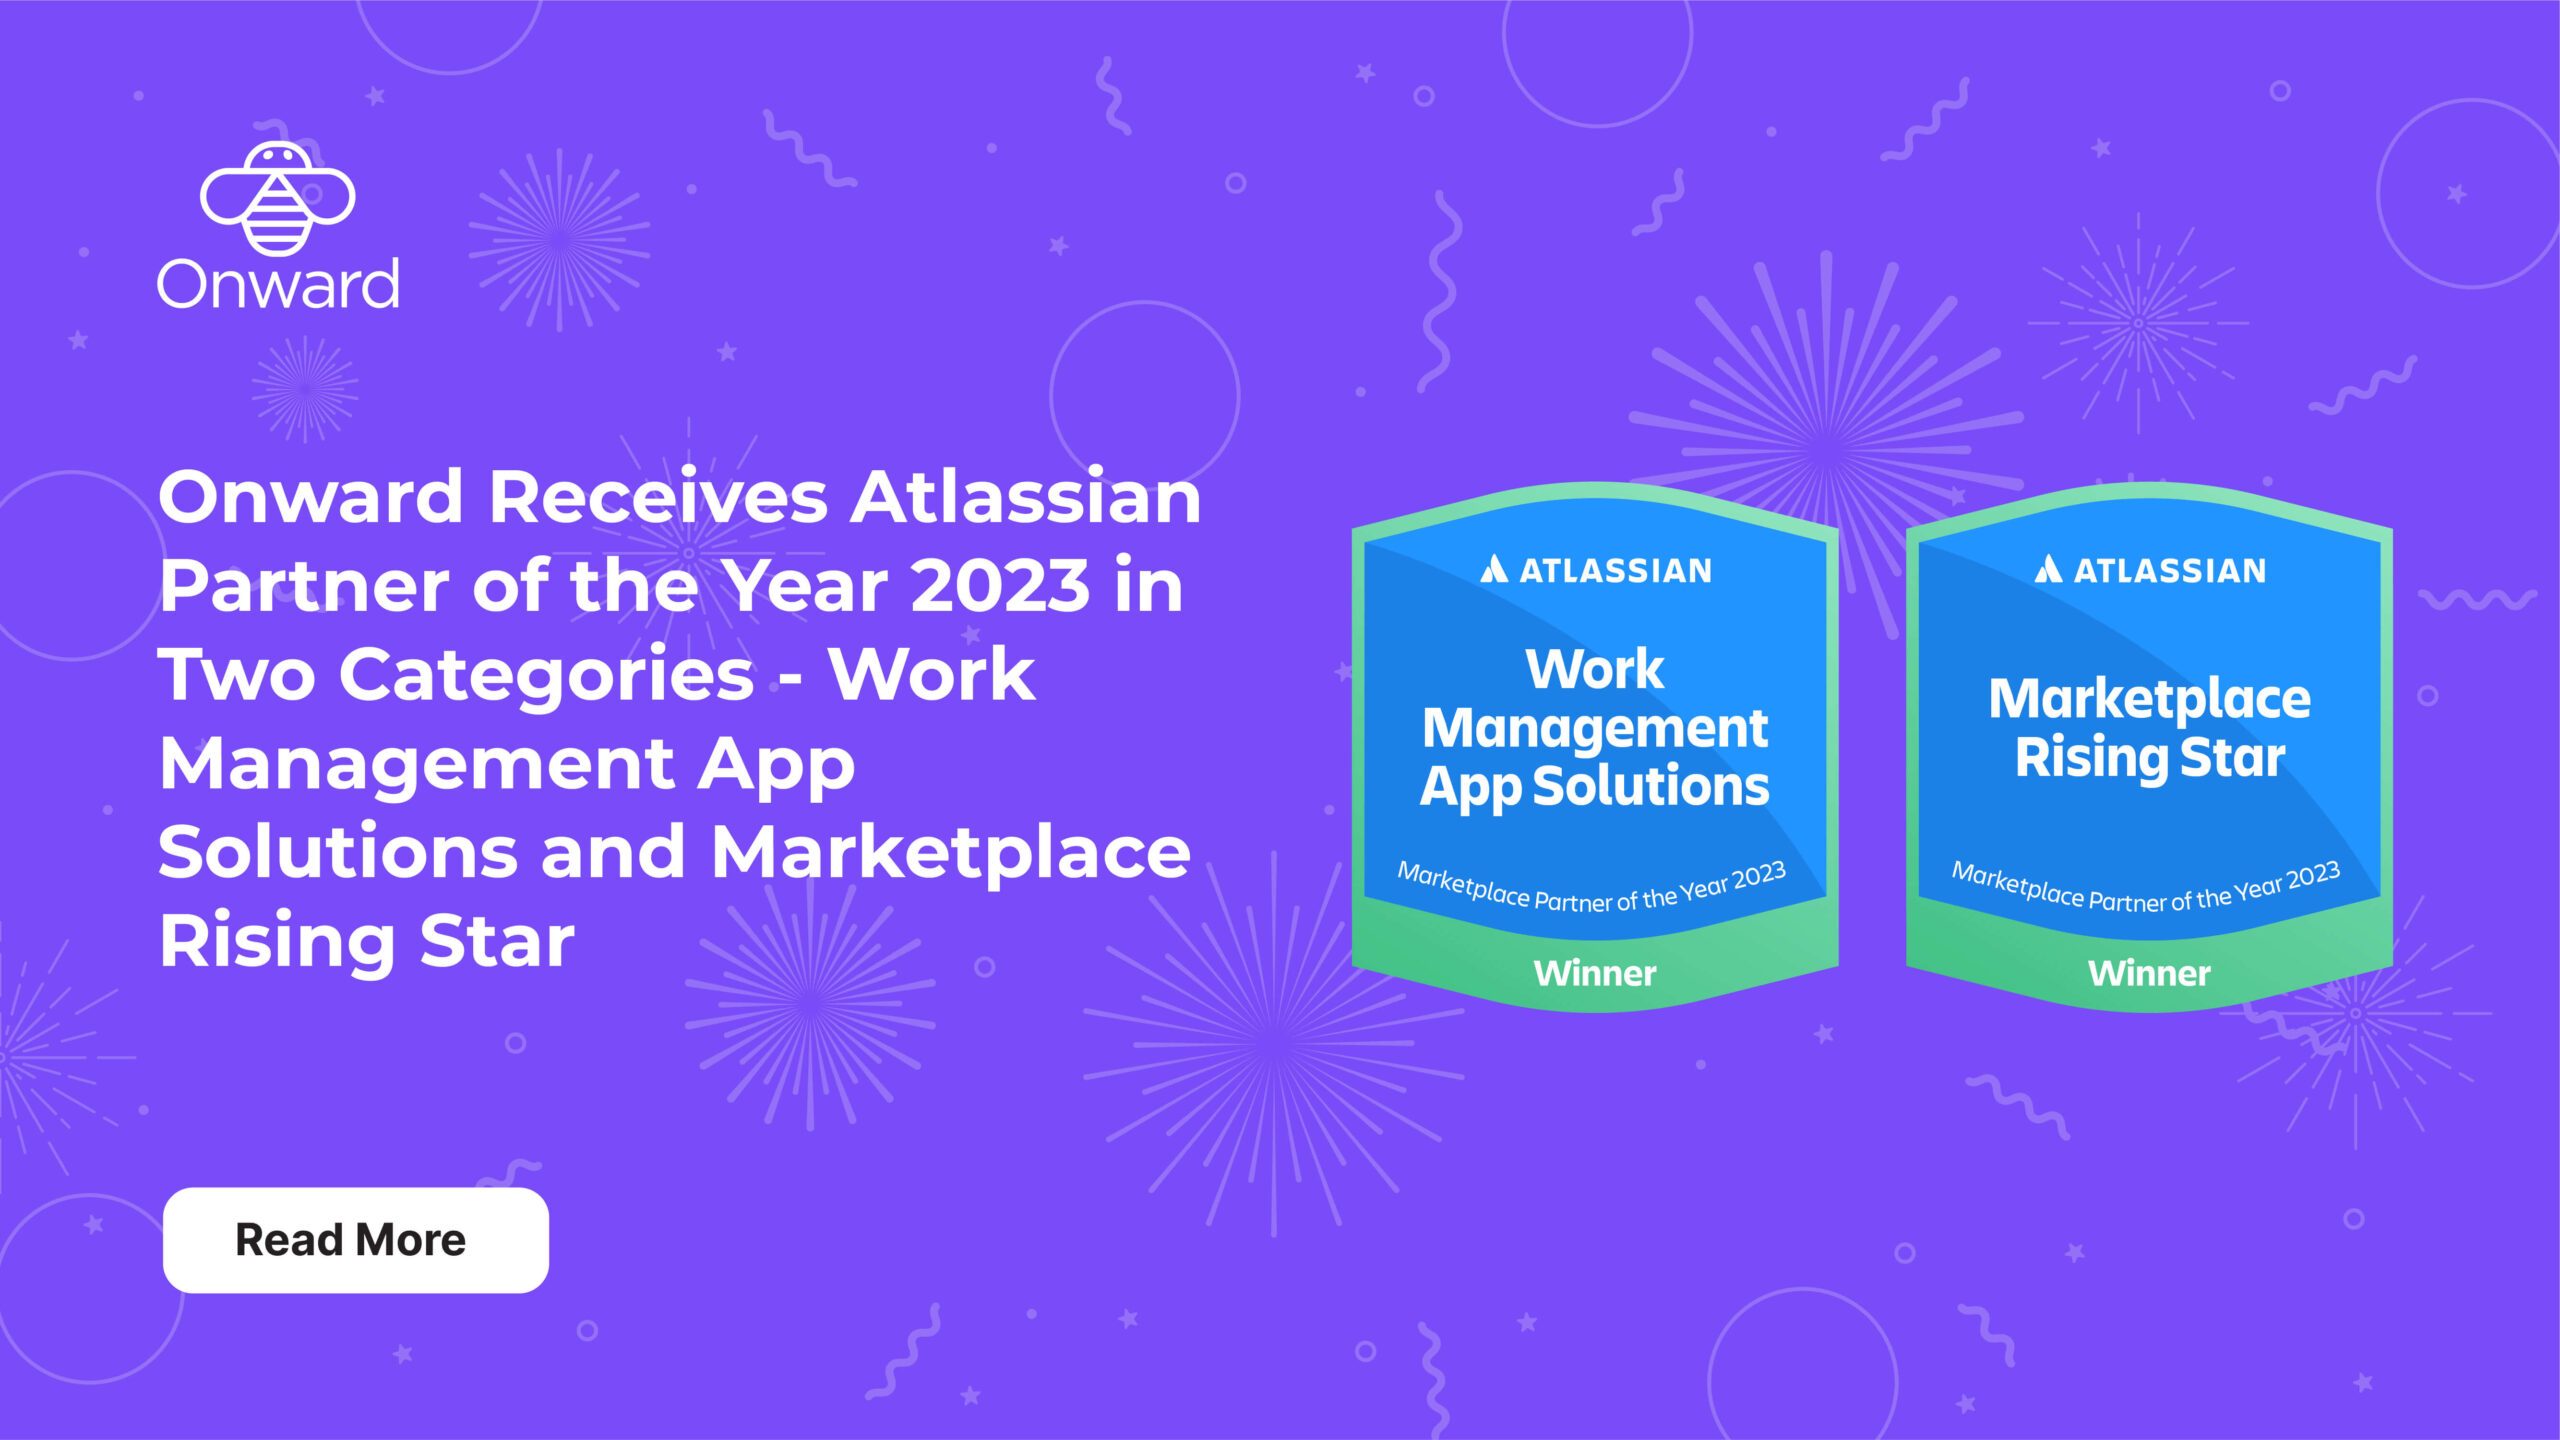 Onward Receives Atlassian Partner of the Year 2023 in Two Categories